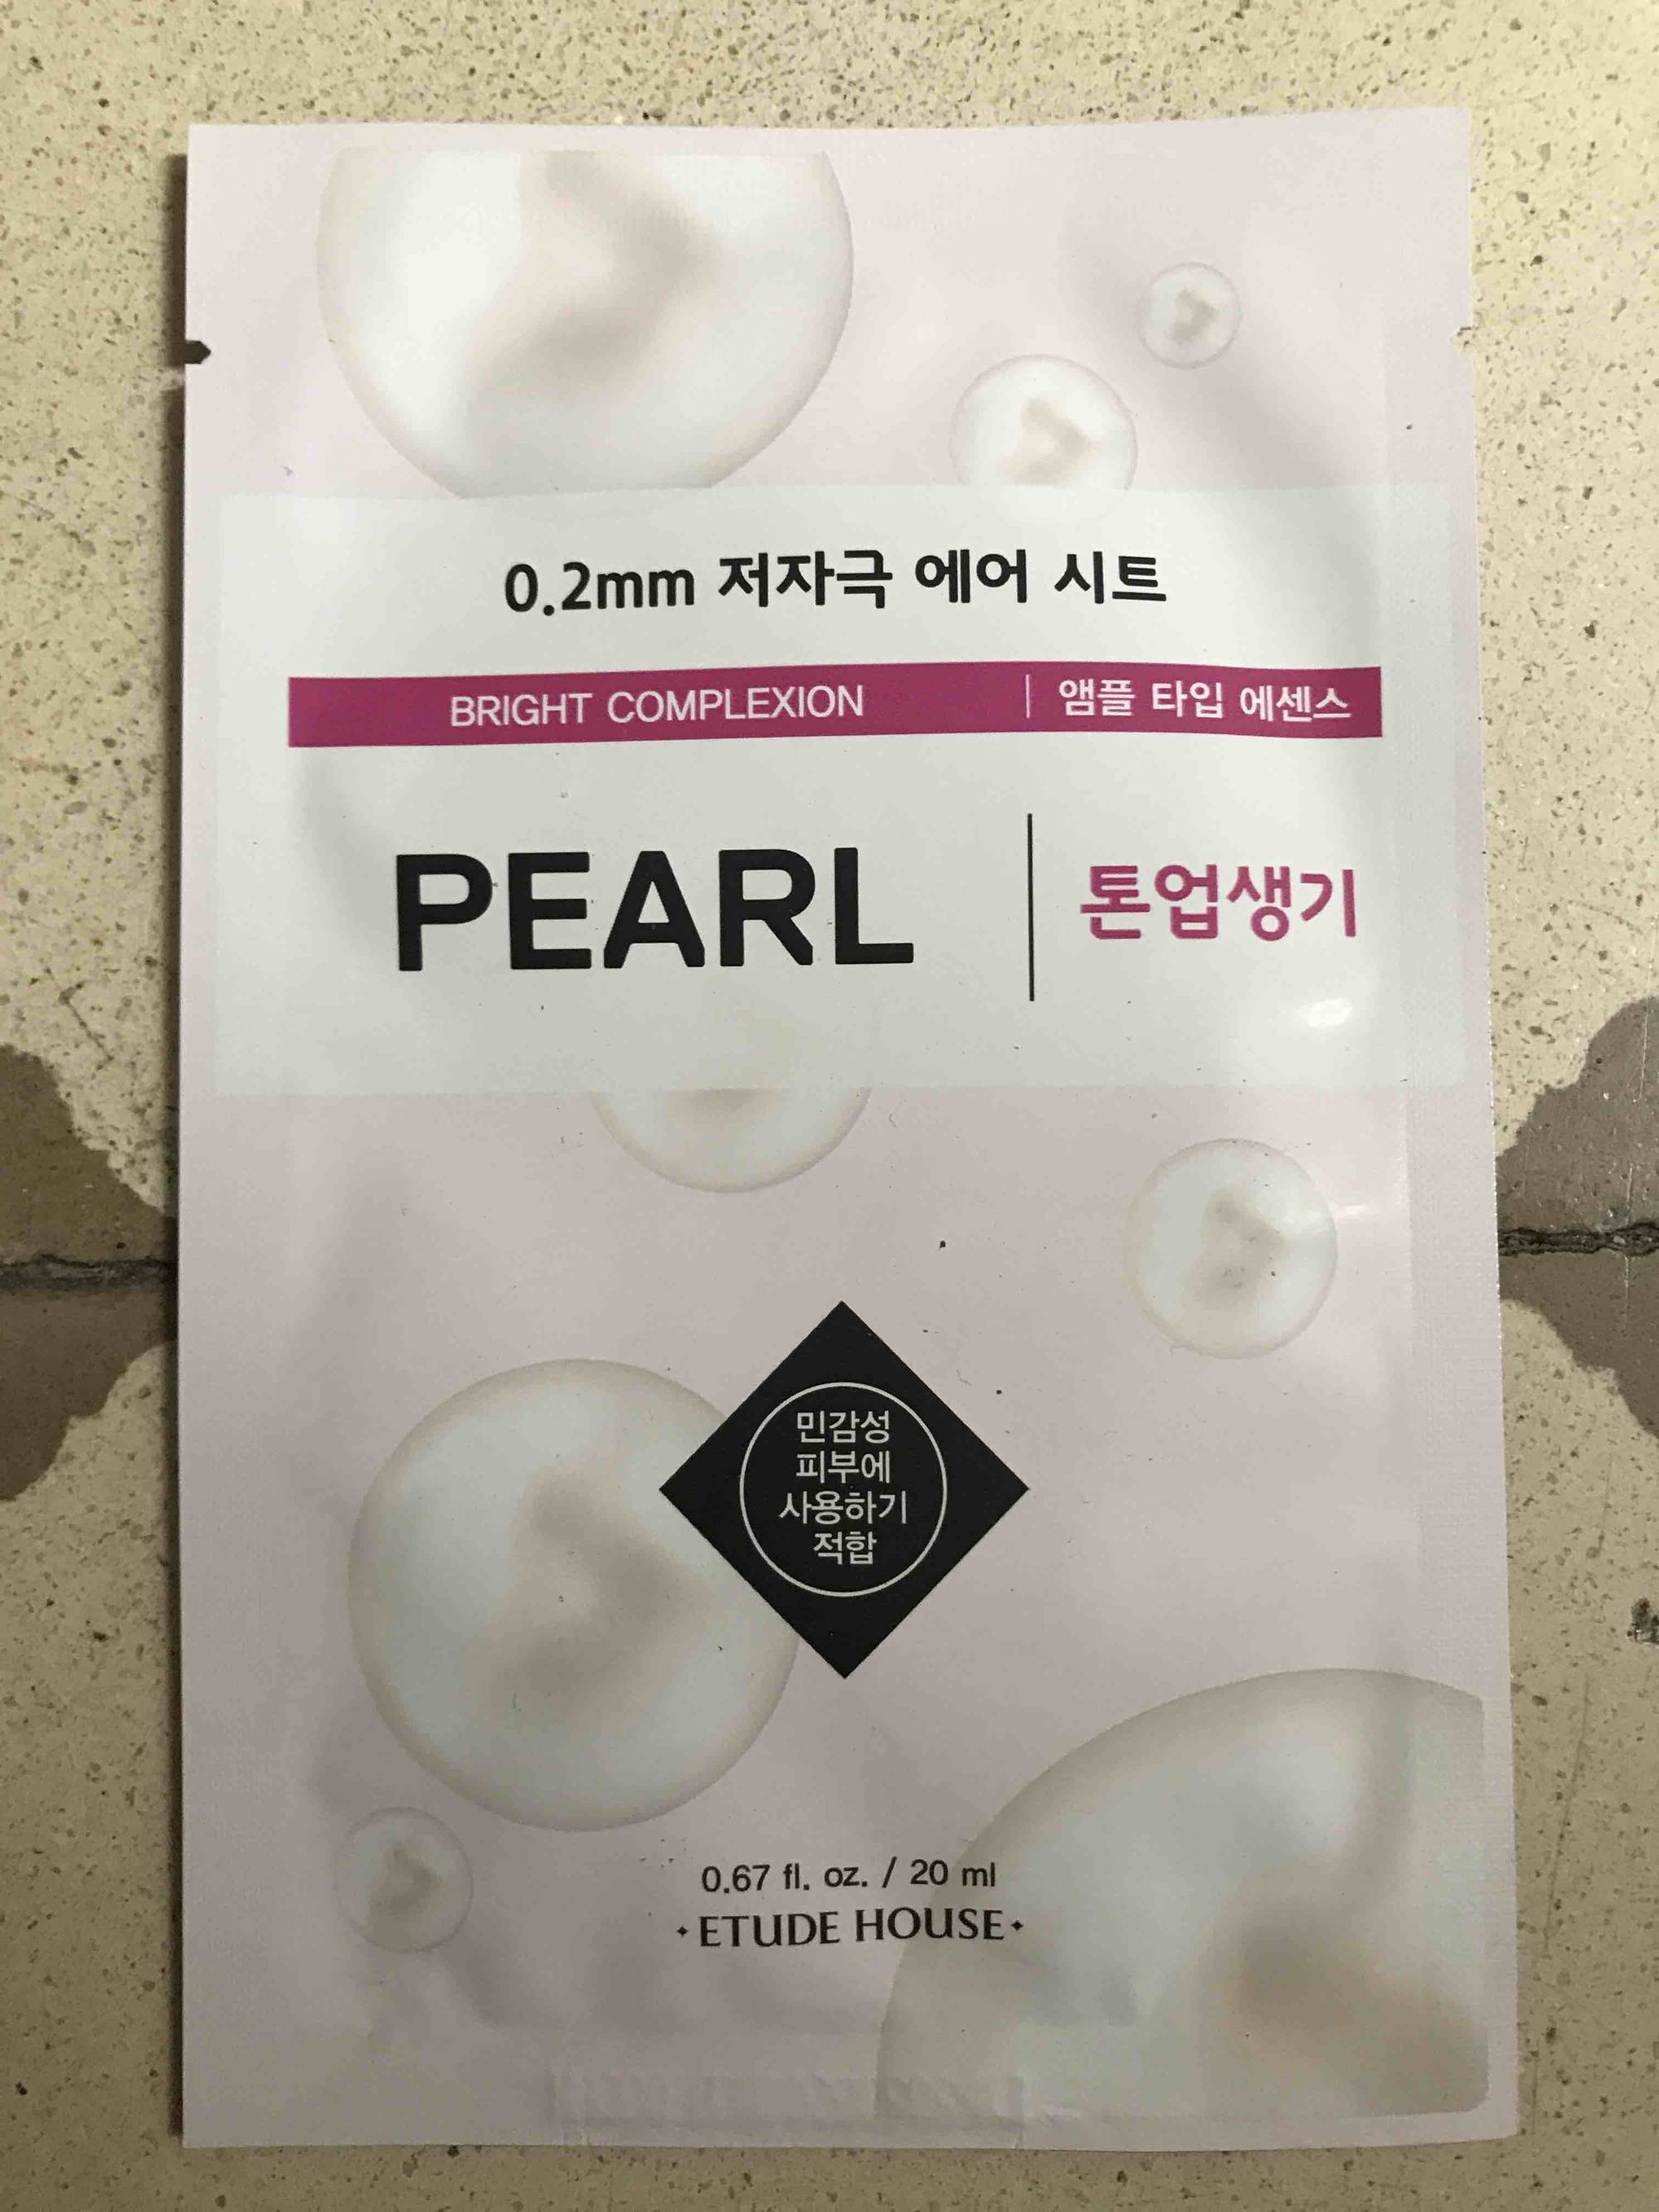 ETUDE HOUSE - Pearl - Bright complexion 0.2 air mask